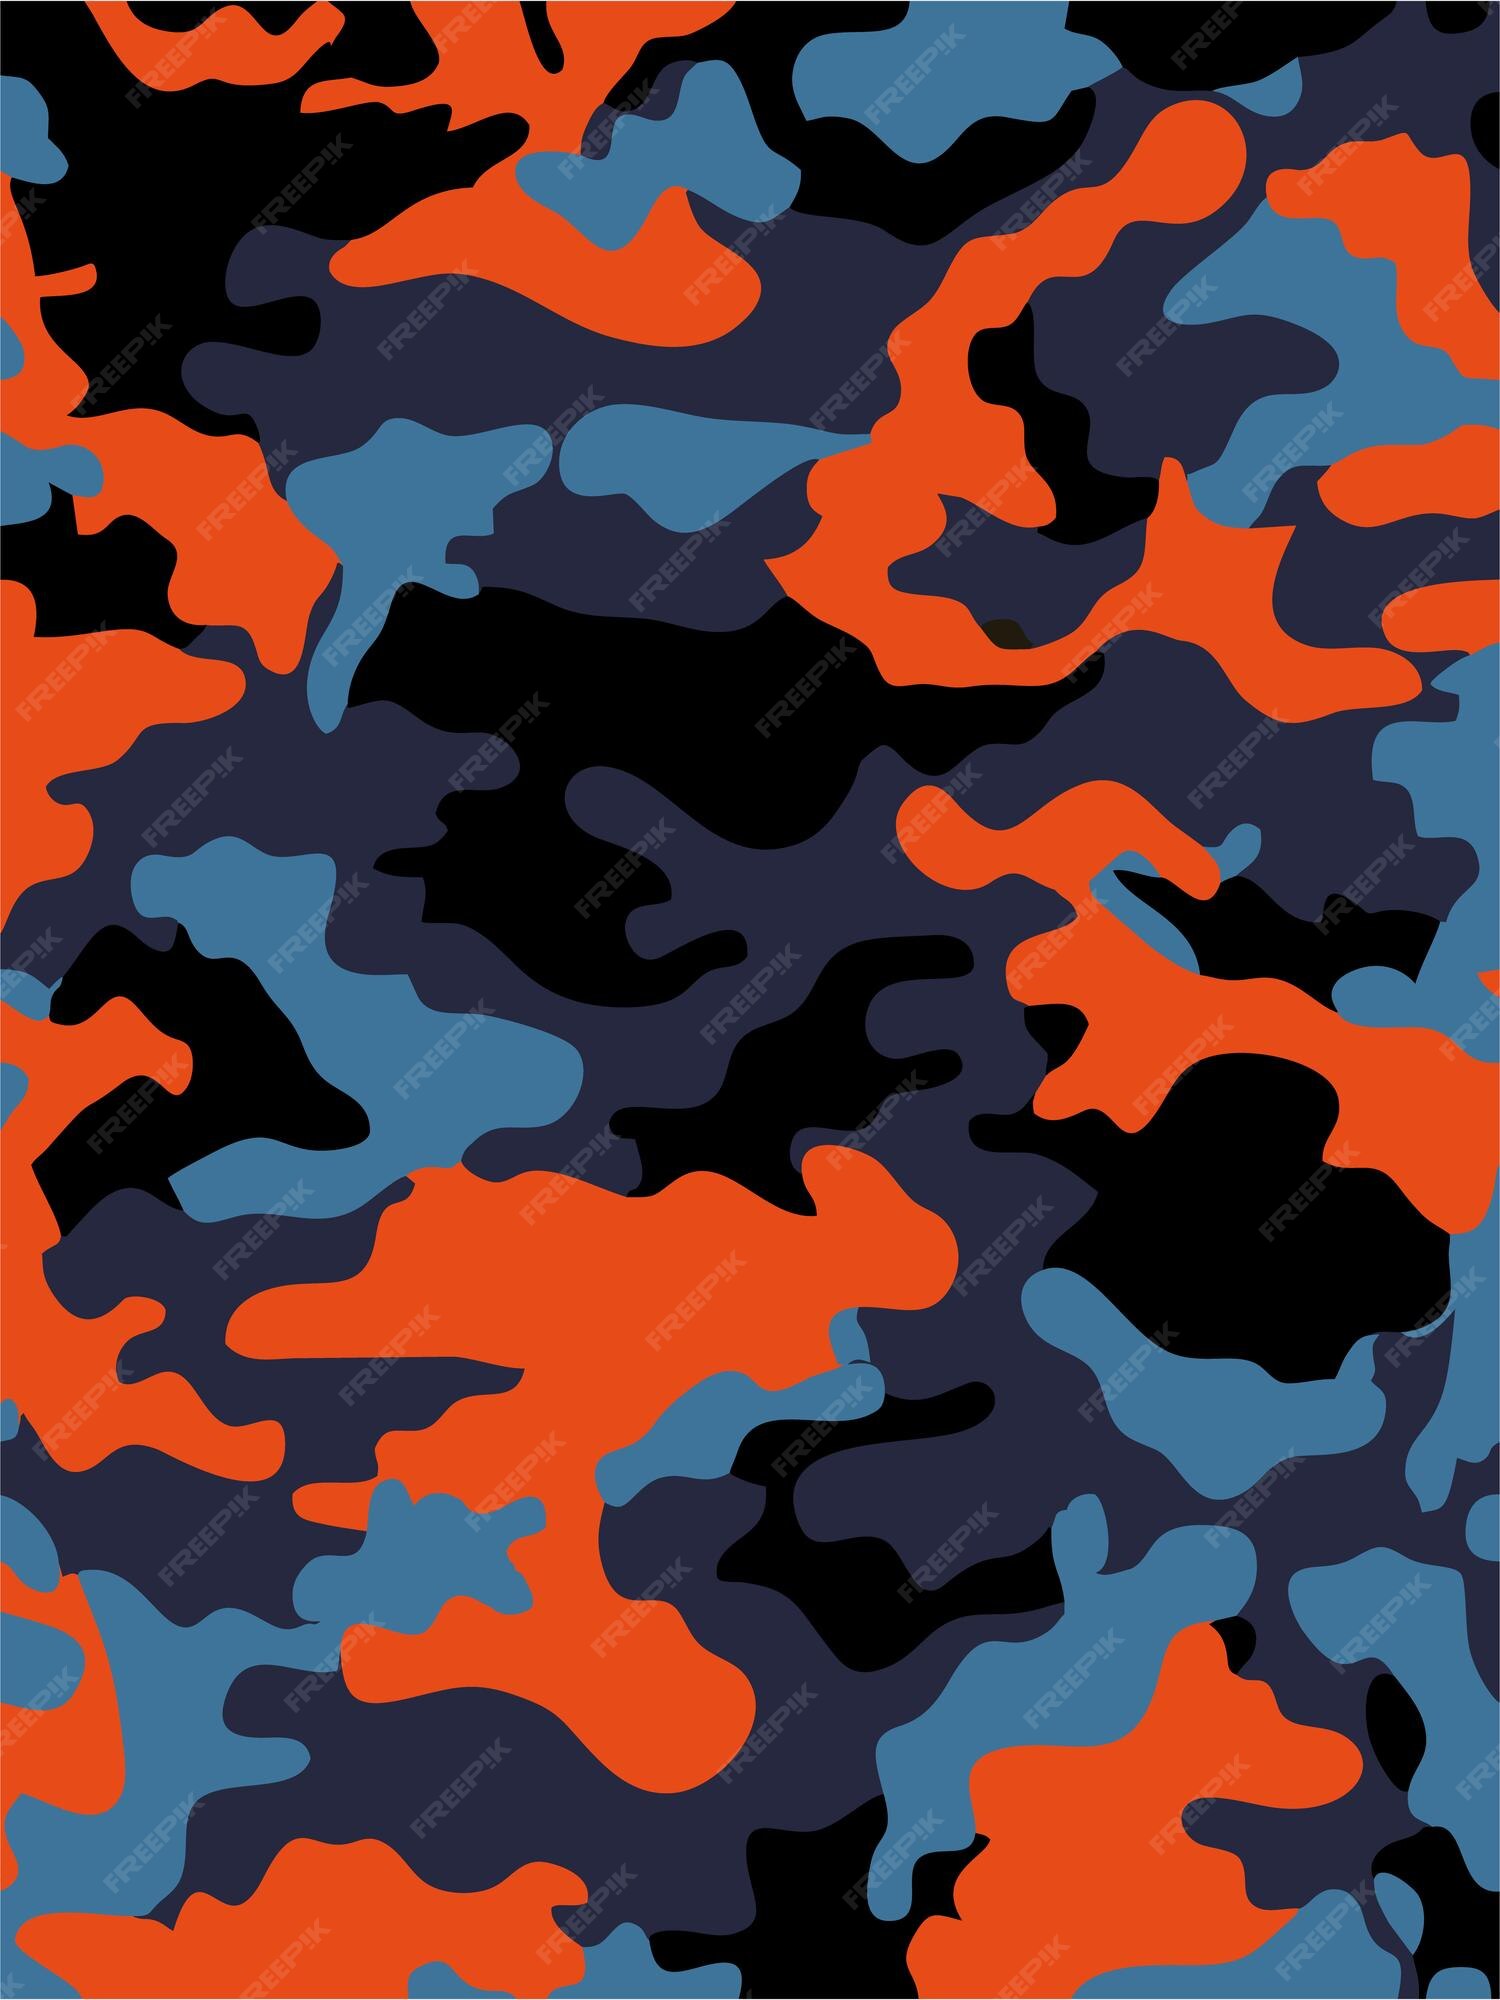 Premium Vector | Camouflage pattern background for army